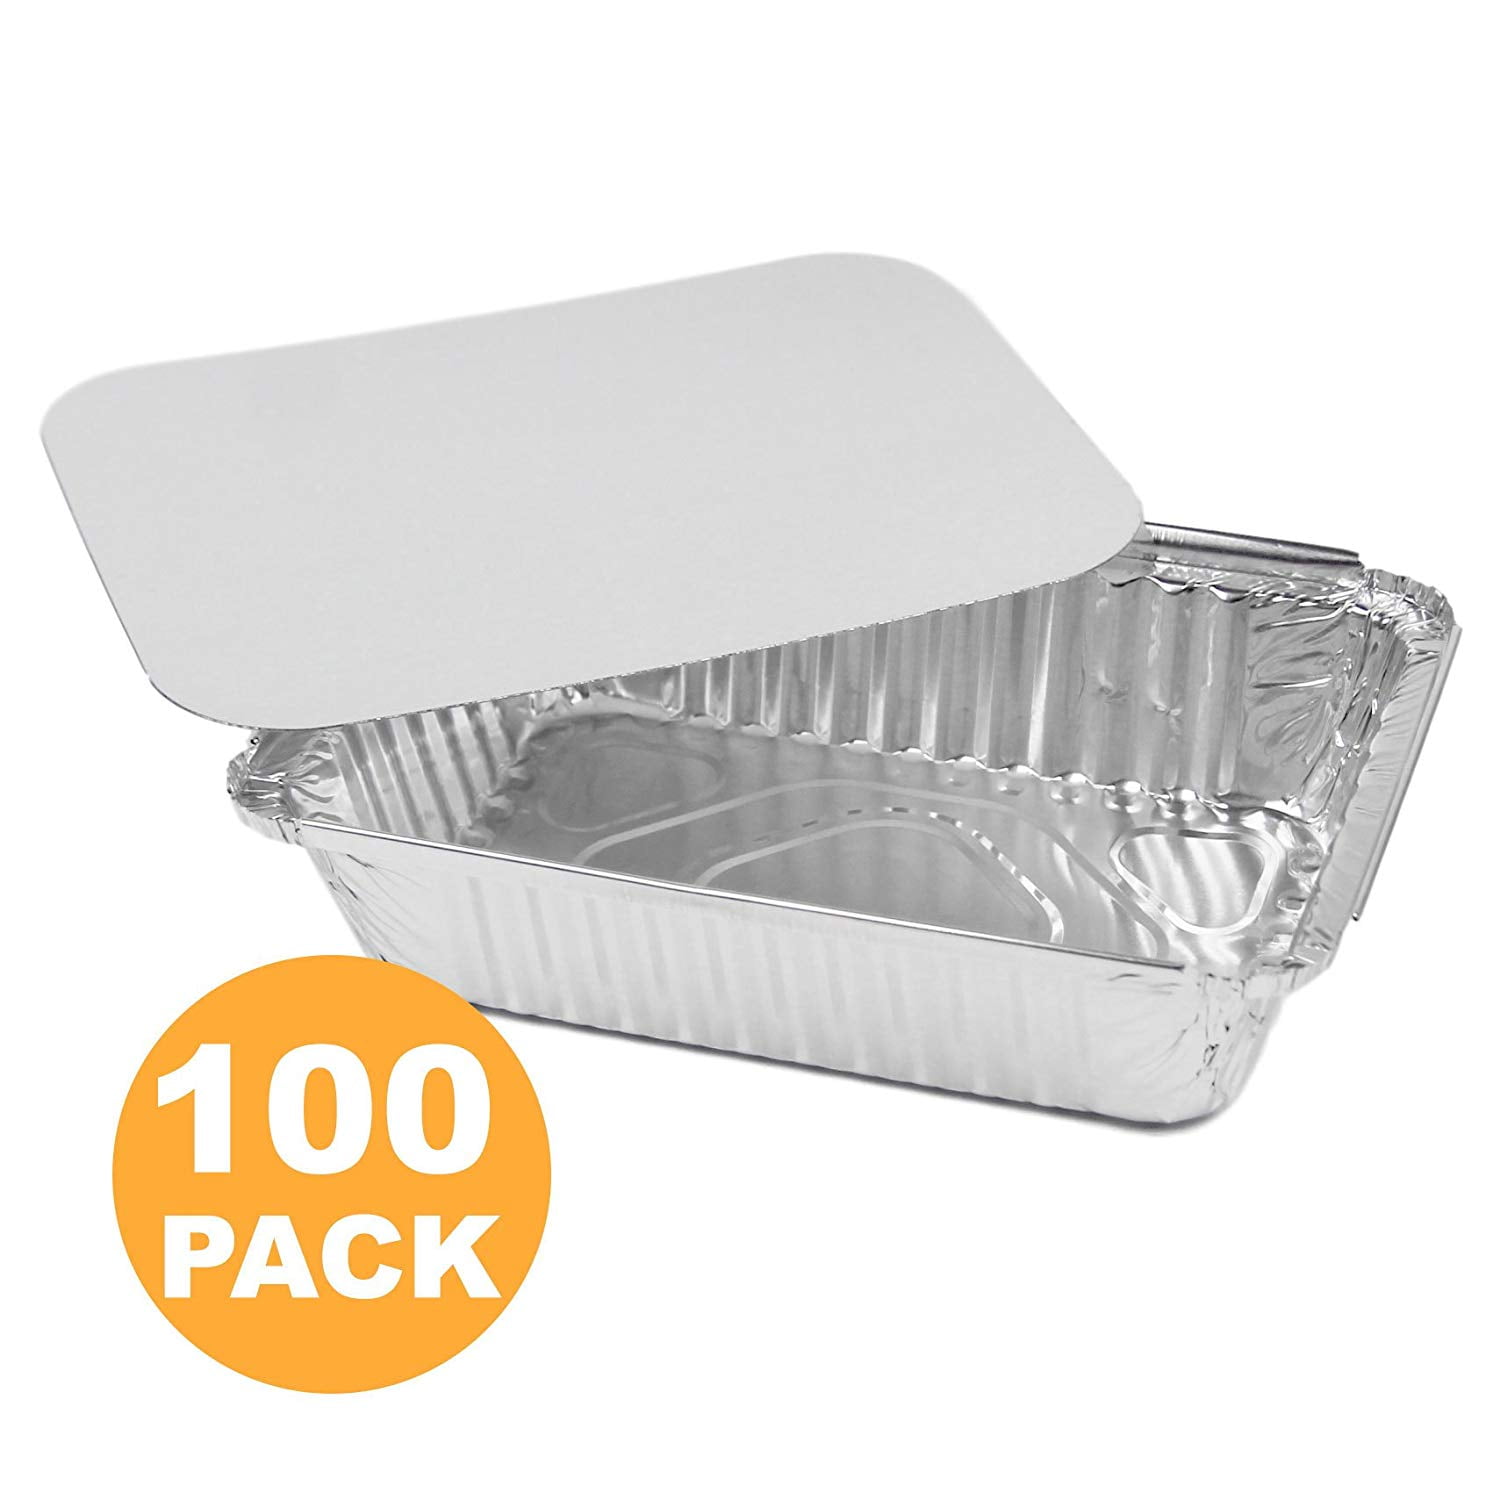 20pcs Christmas Foil Trays BBQ Disposable Food Container Baking Pan With Lids US 